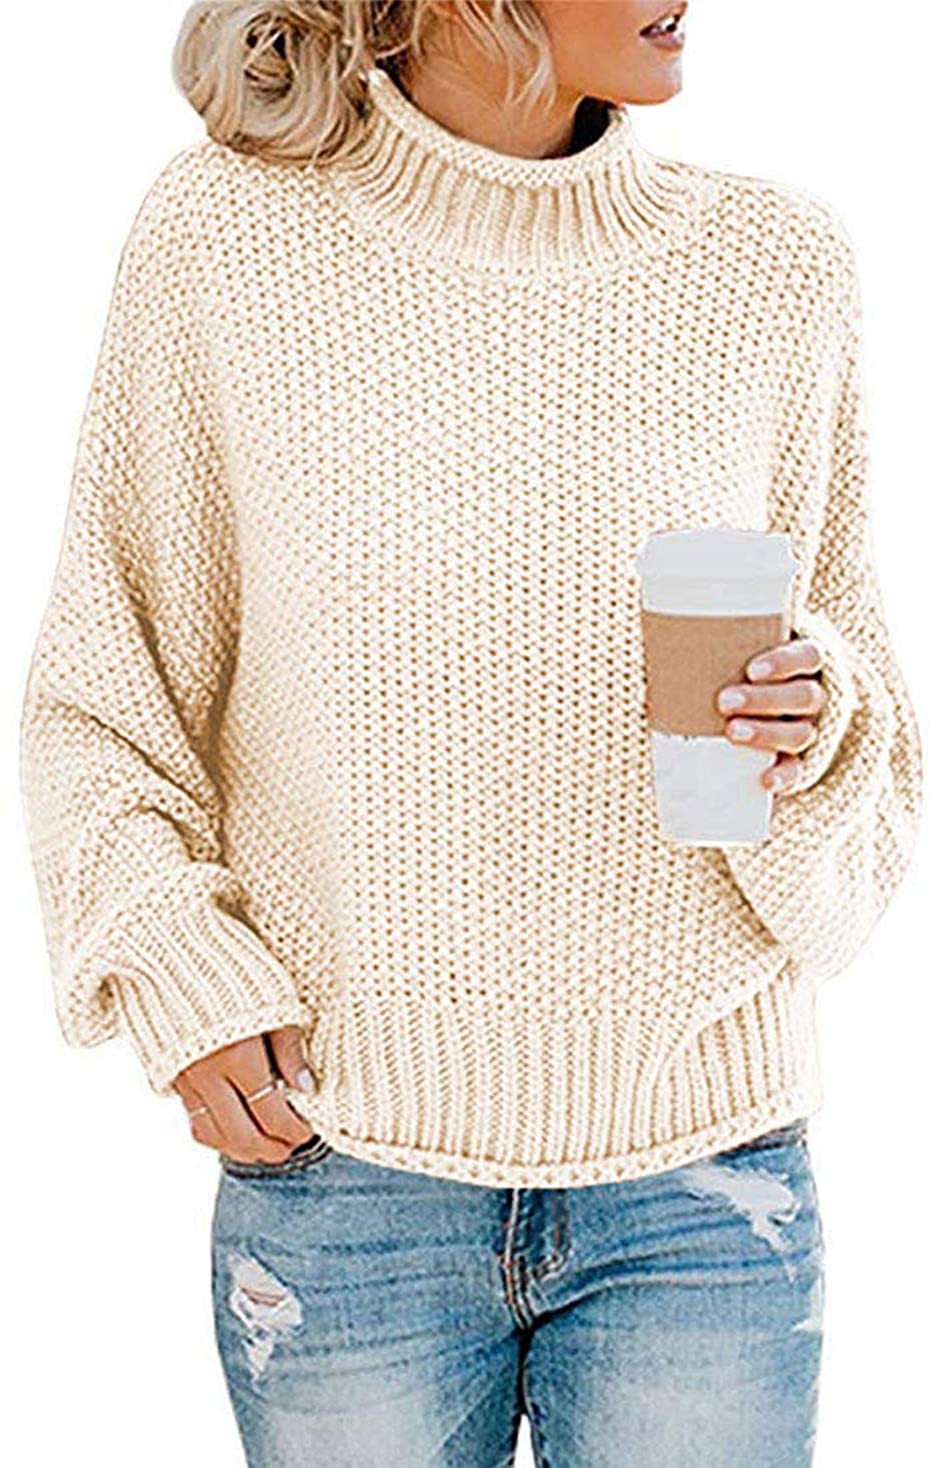 The Best of Amazon Sweaters